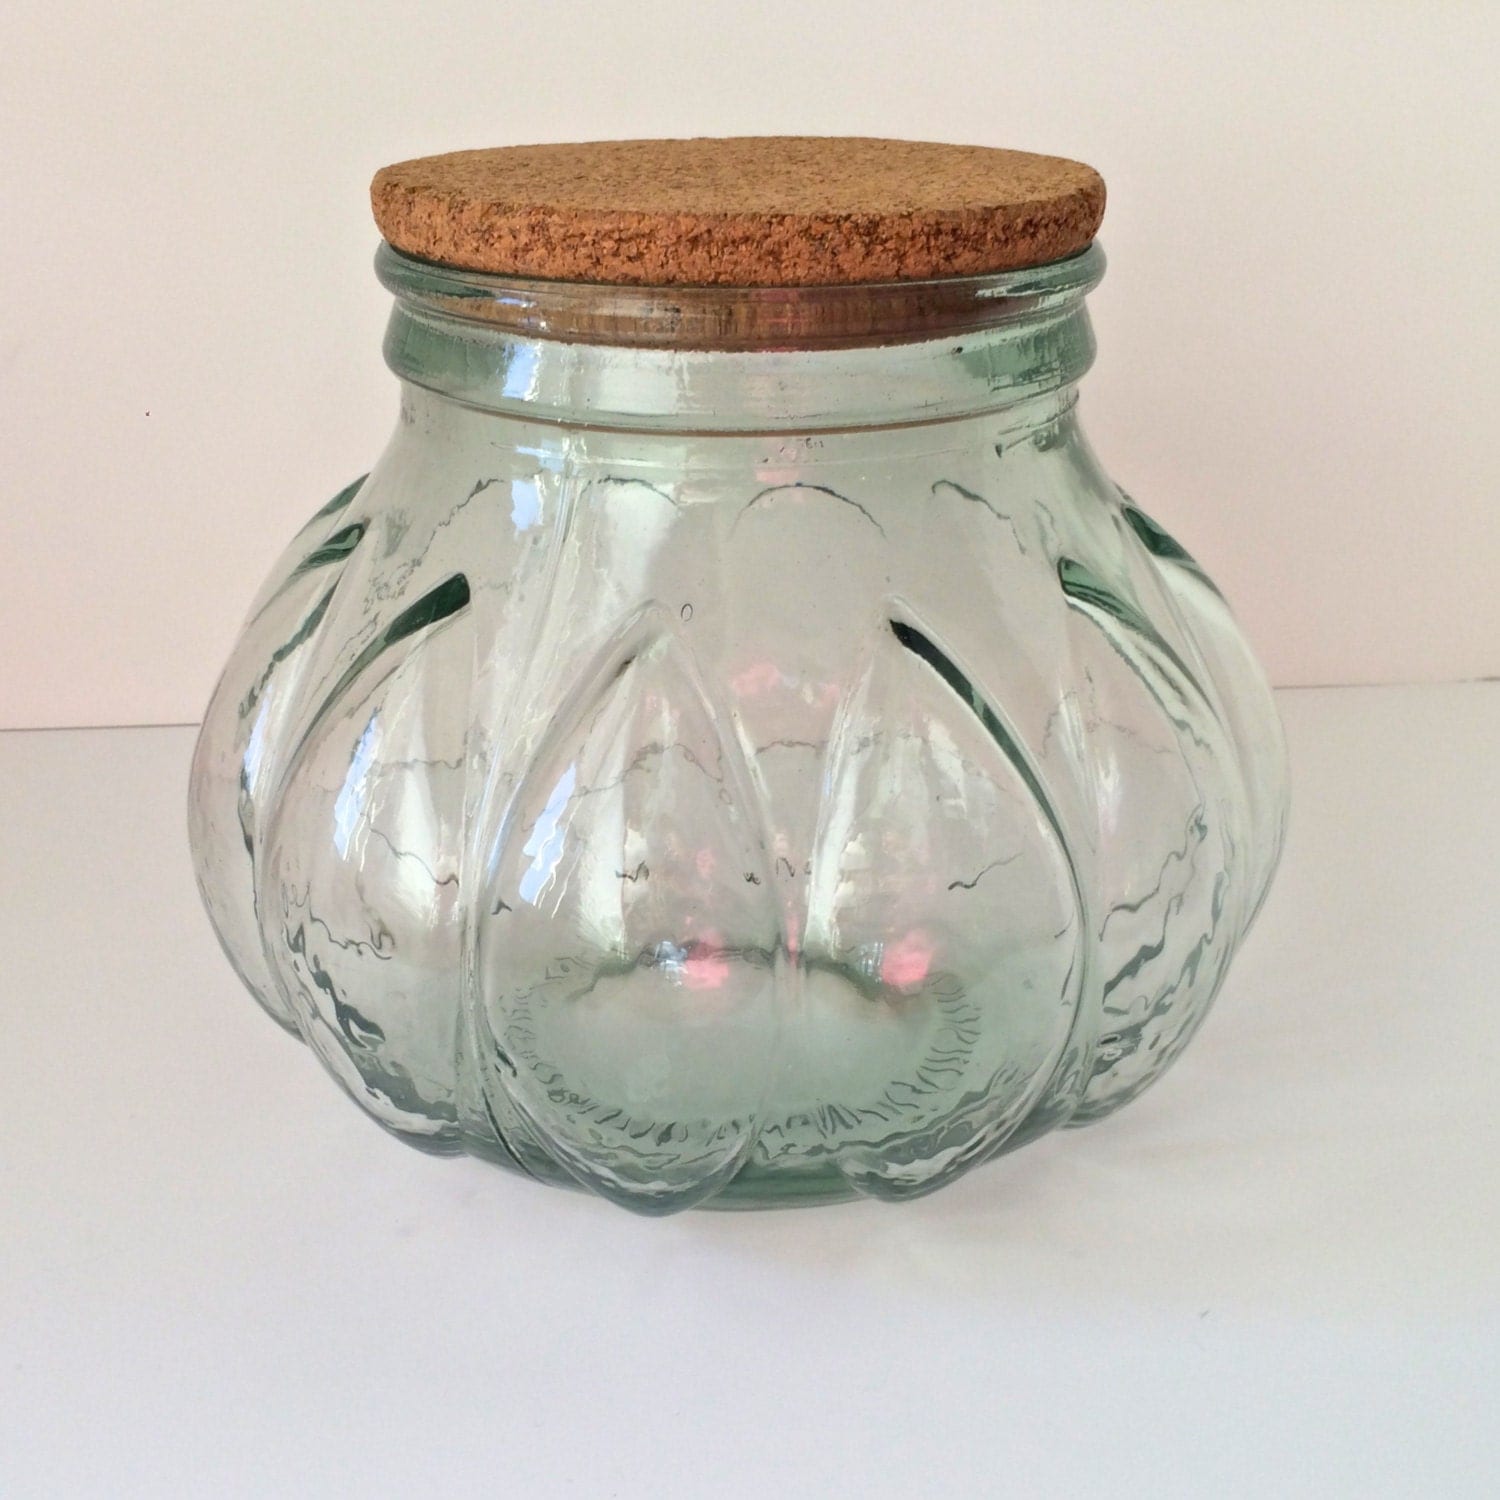 Large Green Glass Apothecary Jar with Cork. Pumpkin Shaped